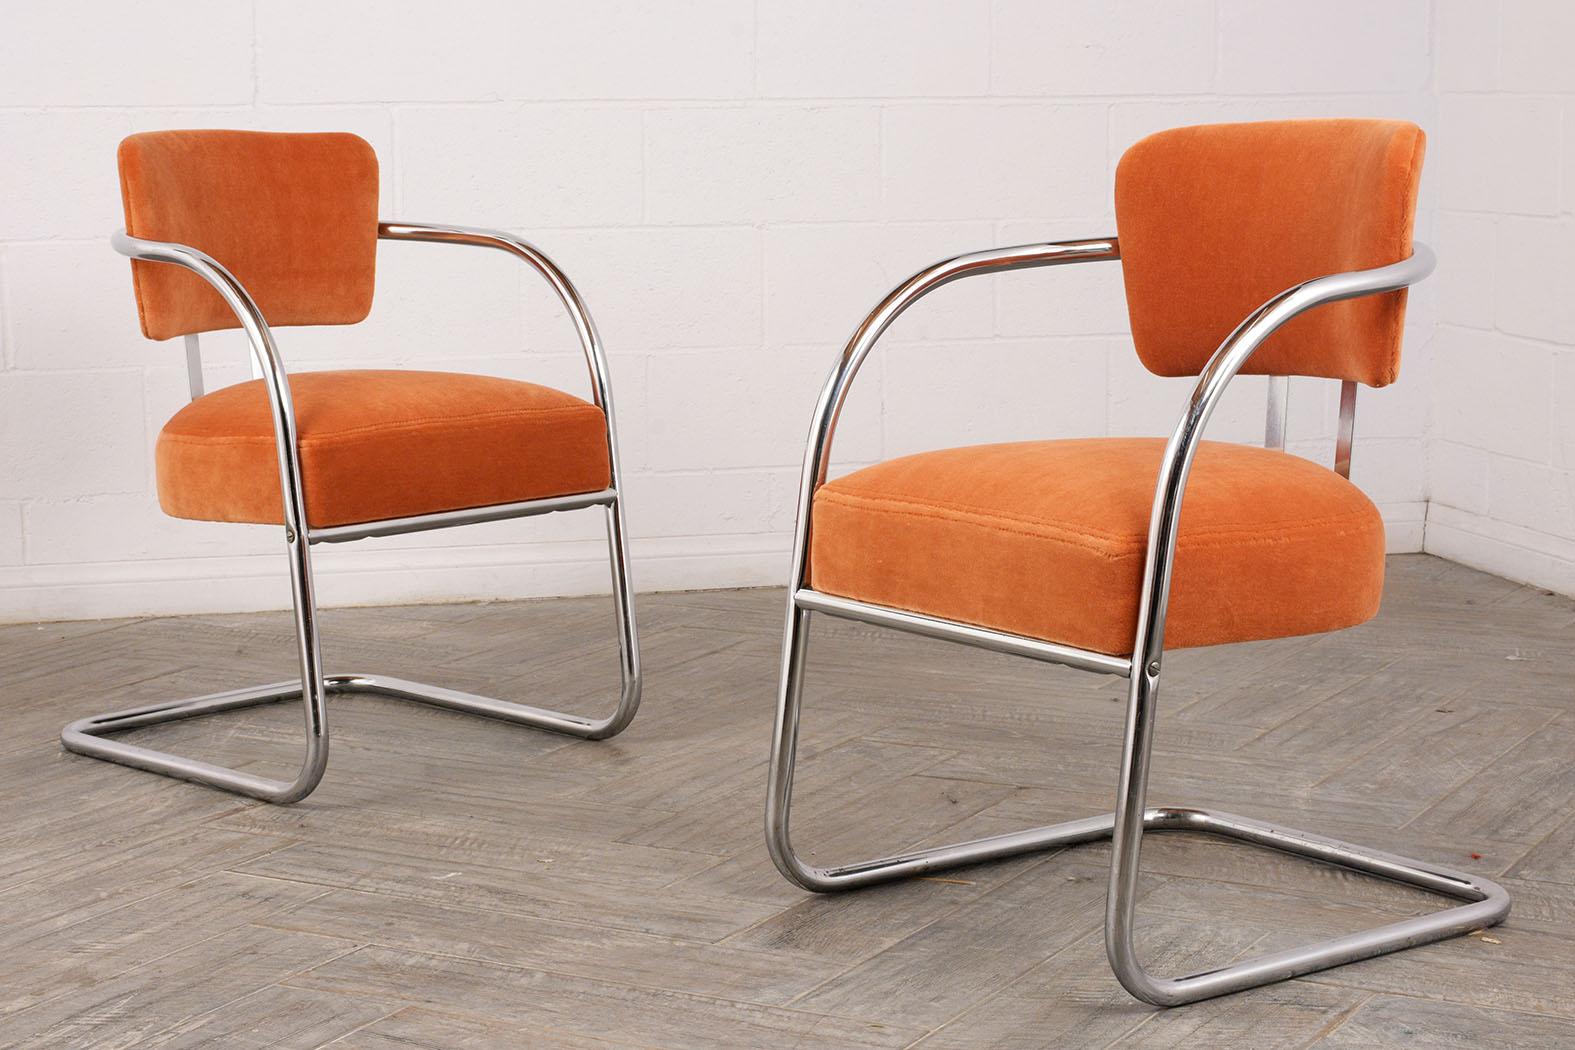 Hand-Crafted Set of Two Modern Chrome Frame Lounge Chairs